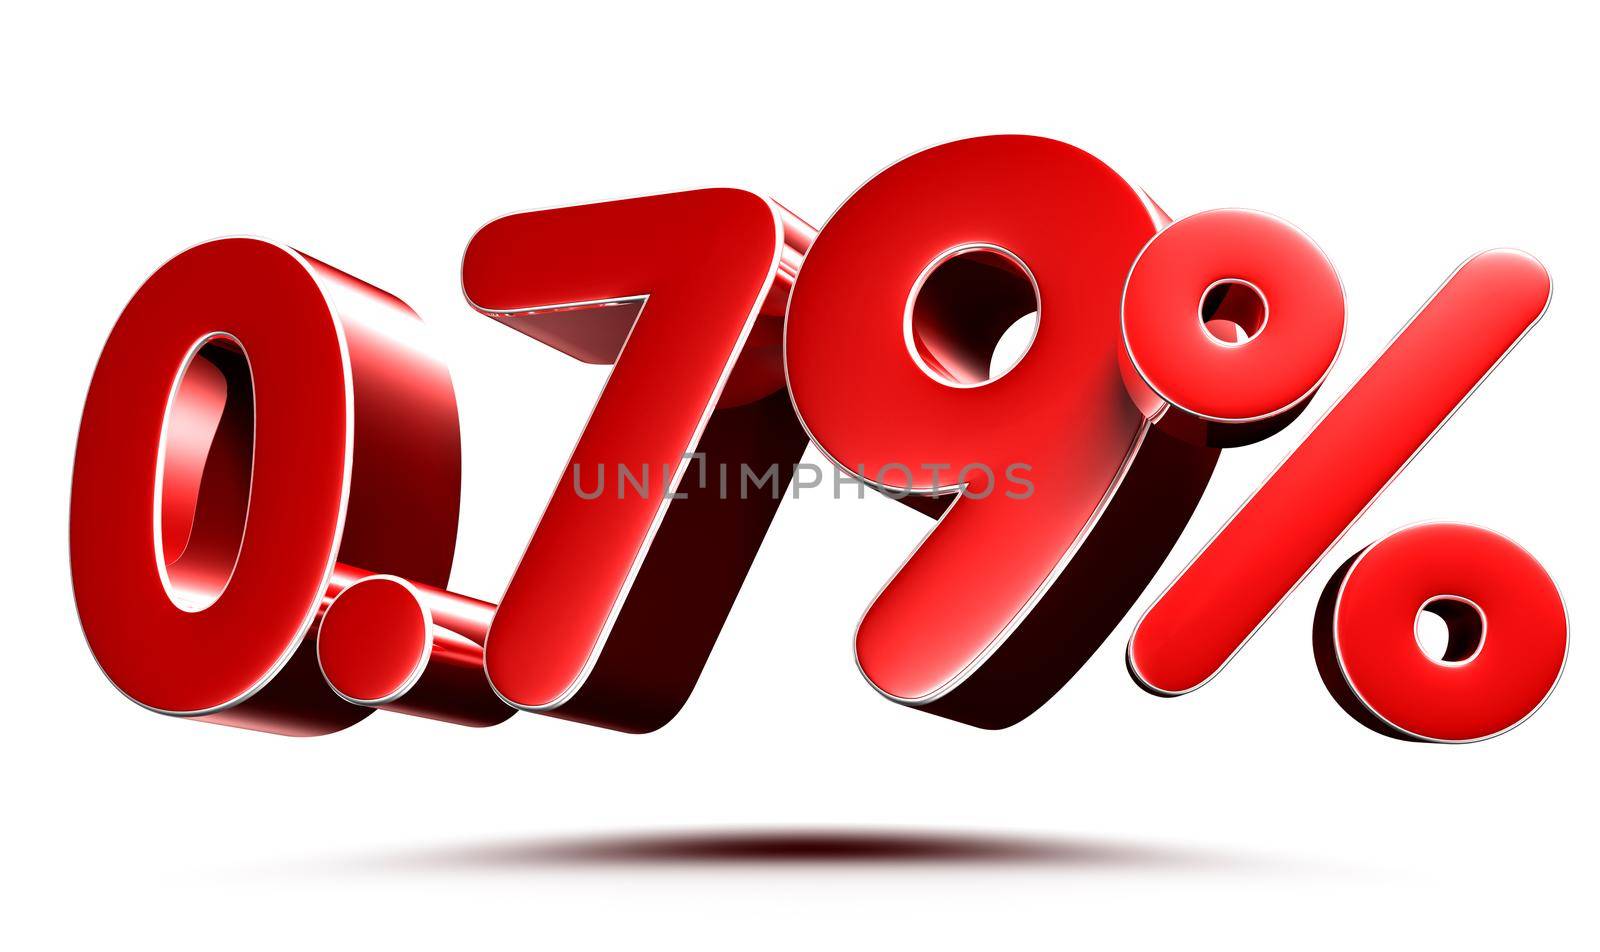 0.79 percent red on white background illustration 3D rendering with clipping path.